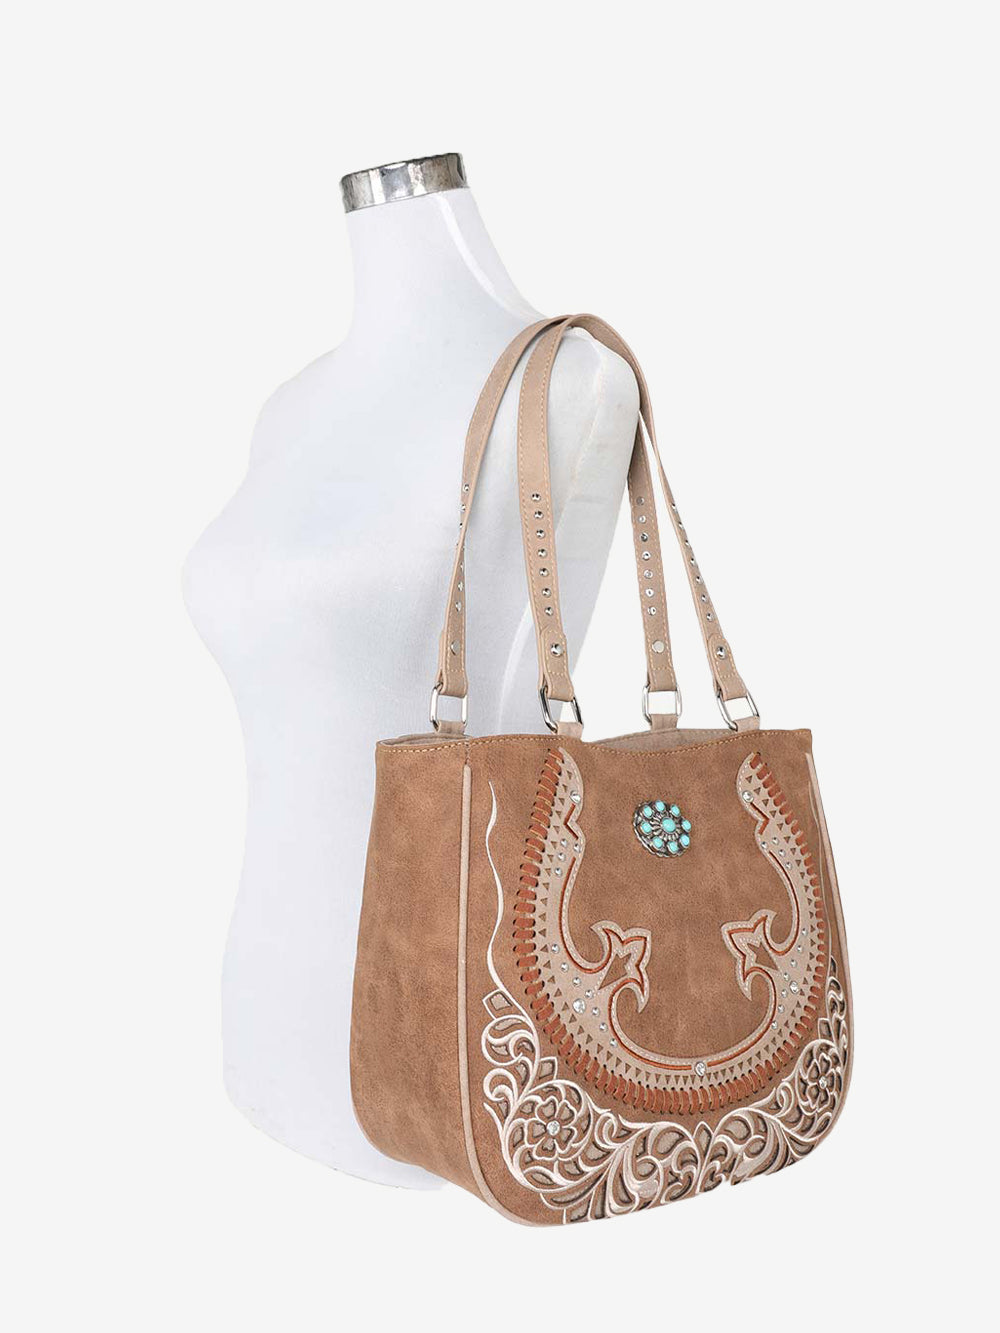 Montana West Cut-out Turquoise Stone Concho Tote Bag